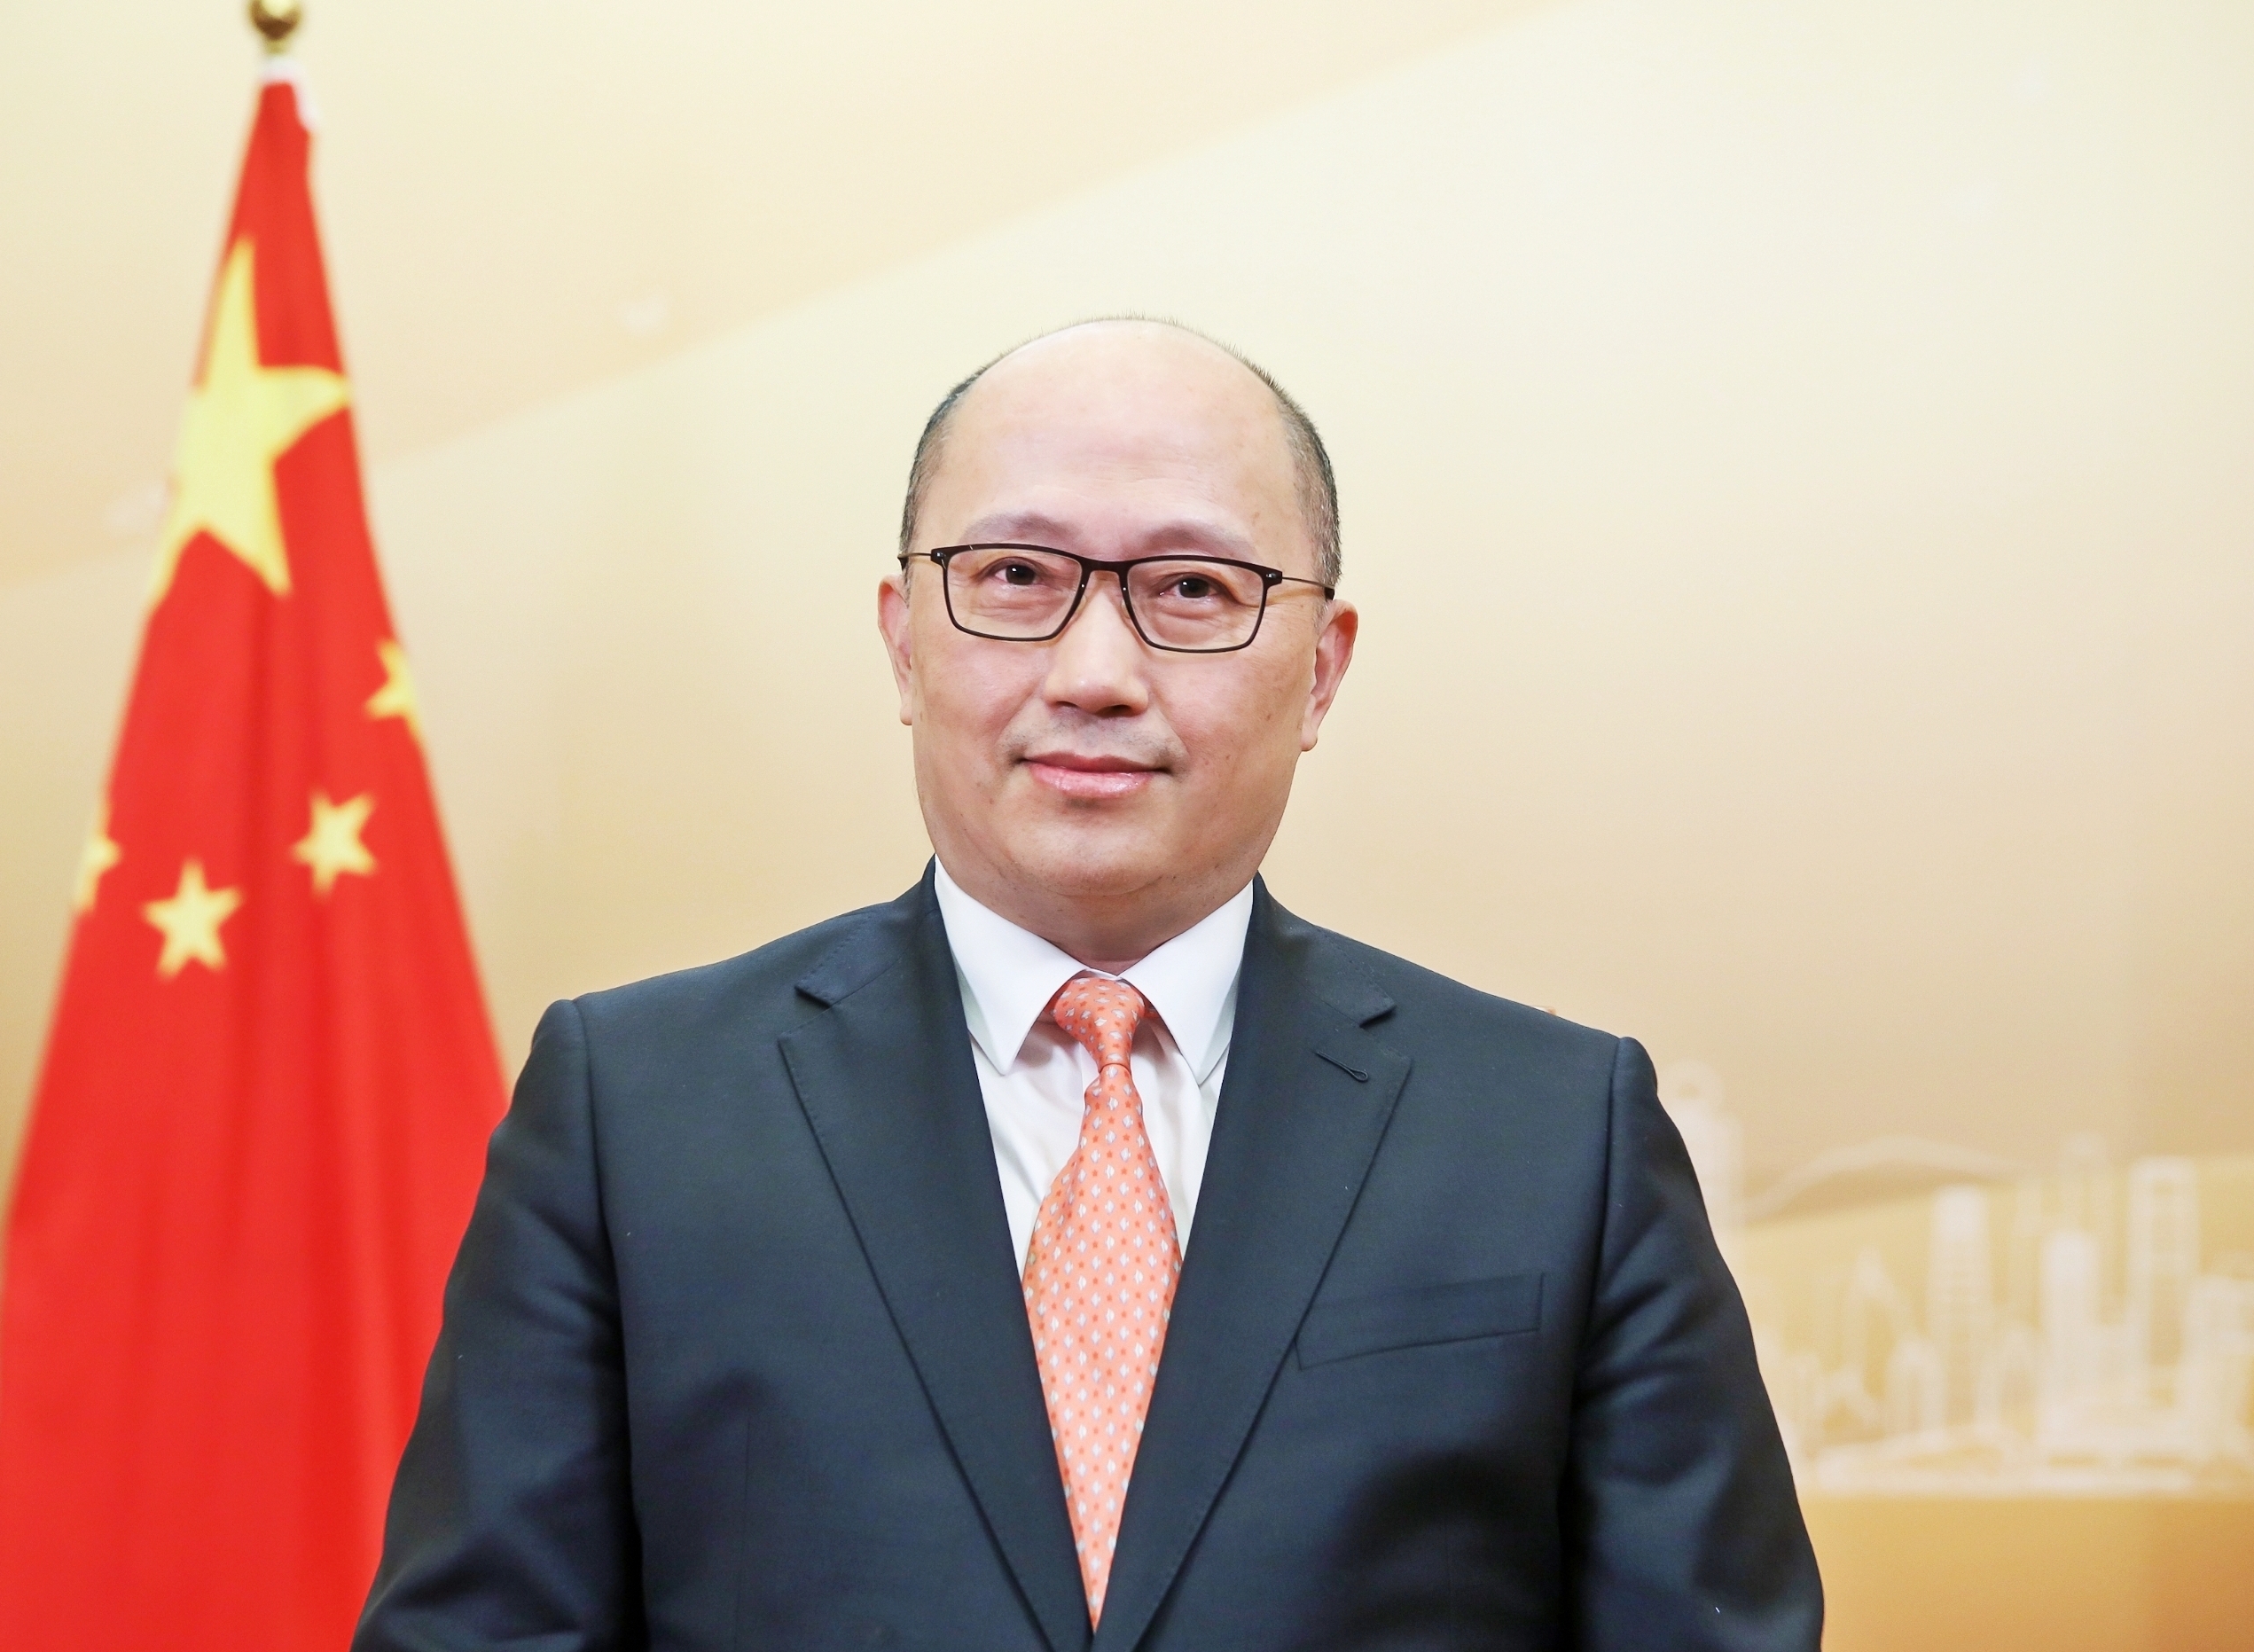 Zheng Yanxiong, director of the Liaison Office of the Central People's Government in the Hong Kong Special Administrative Region (HKSAR), delivers the Spring Festival address in south China's Hong Kong, January 15, 2023. /Liaison Office